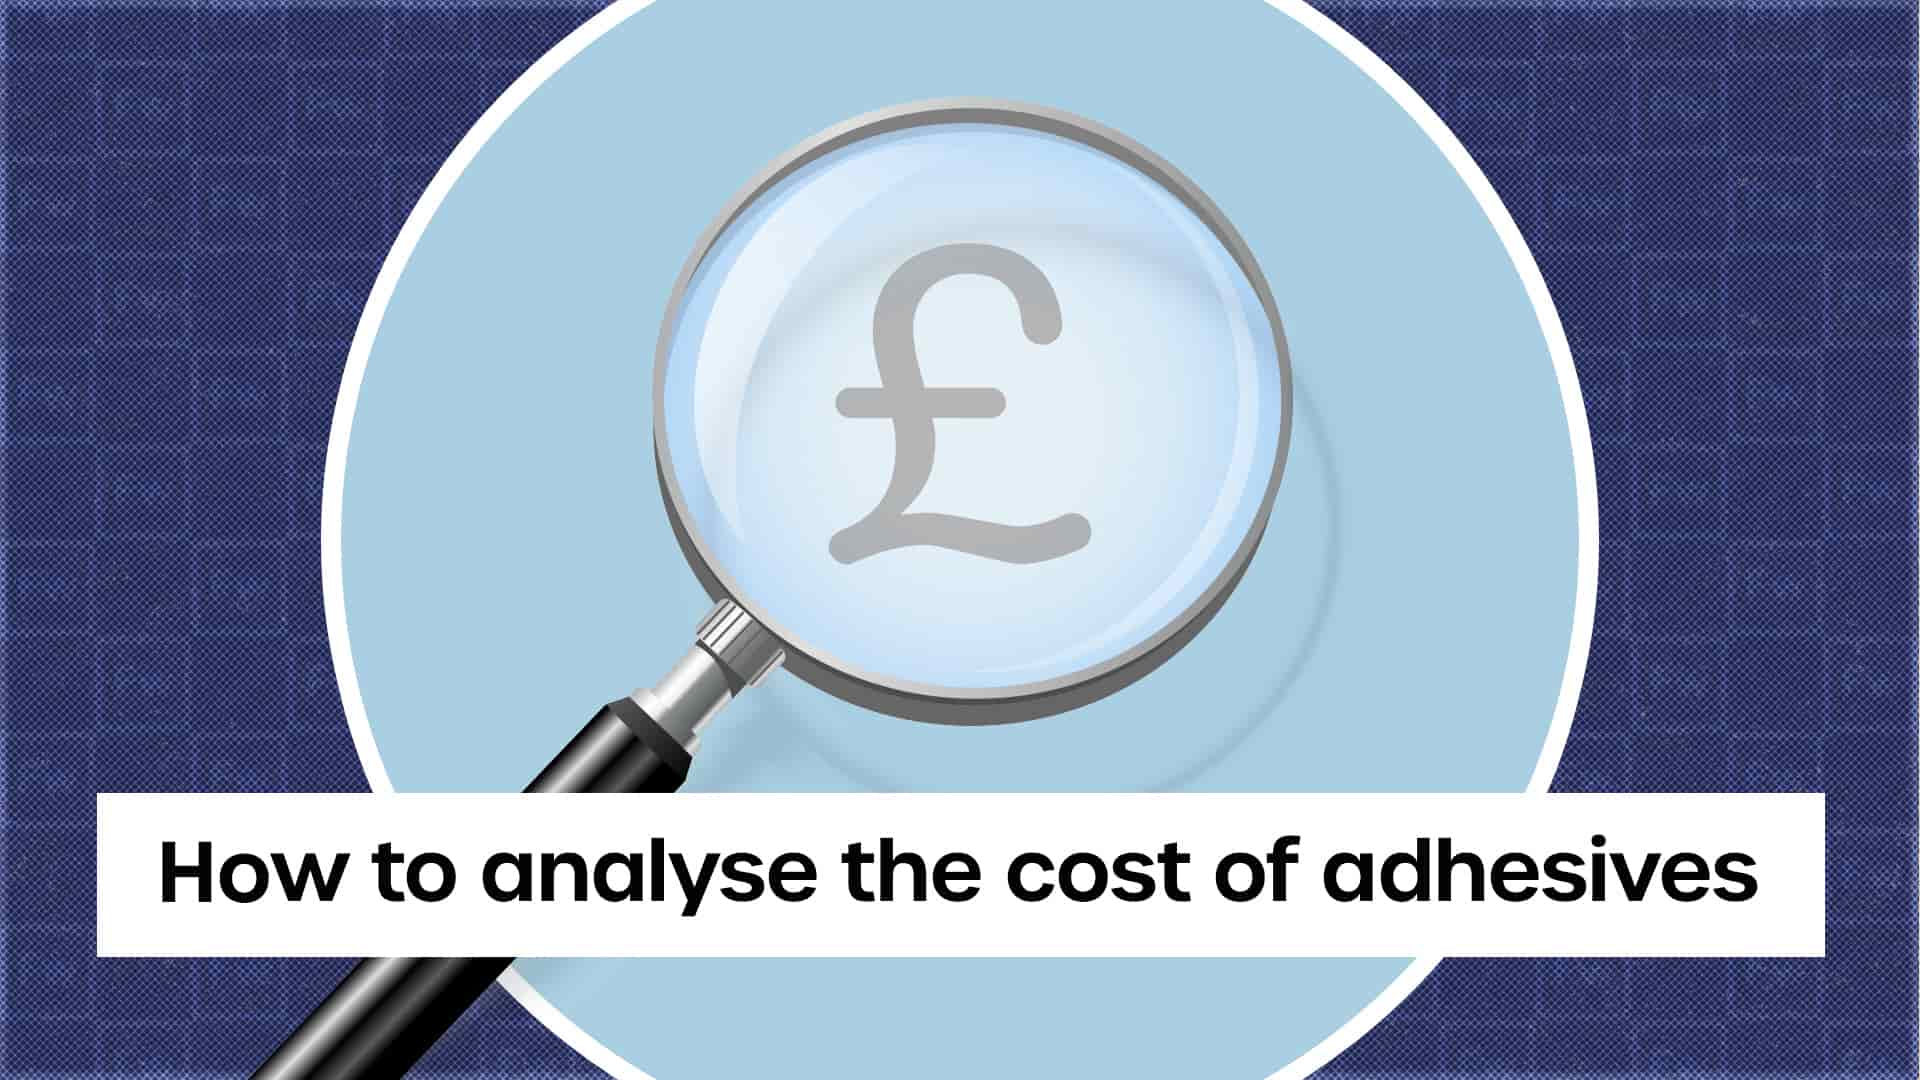 How much do adhesives cost?